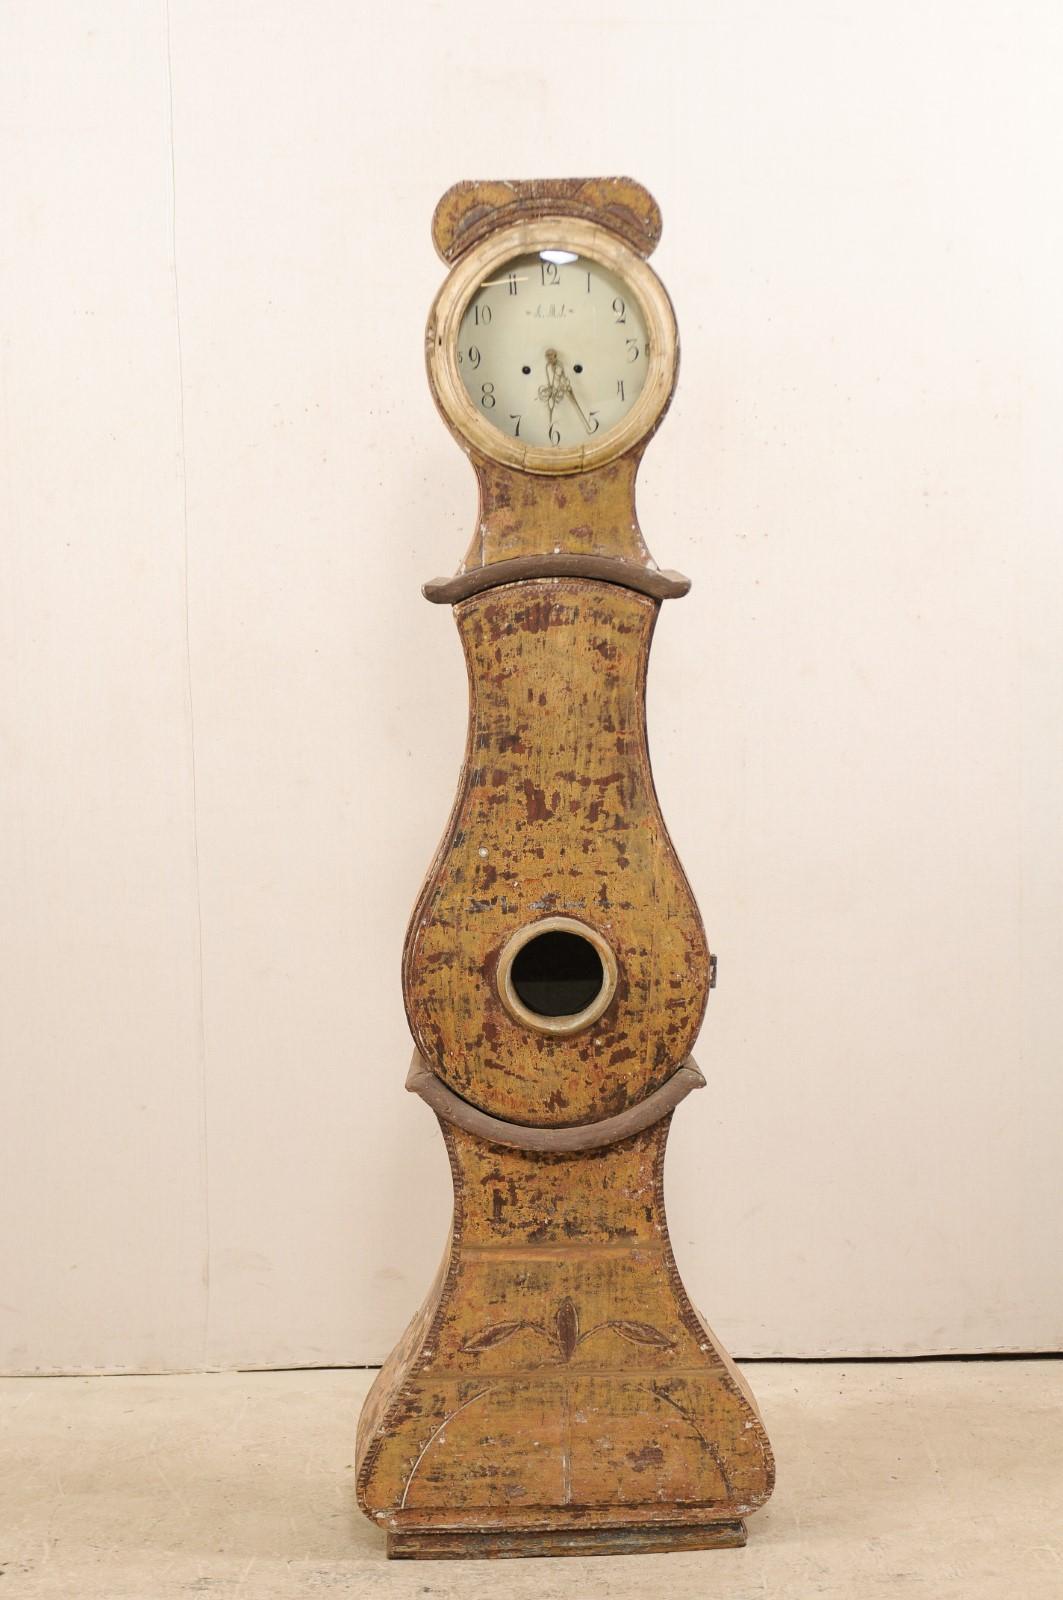 A 19th century painted wood Swedish grandfather clock. This antique floor clock from central Sweden is from the 1820s and features a raised crest with flat-top, it's original round metal face & movements, a raindrop shaped belly, a curvy triangular